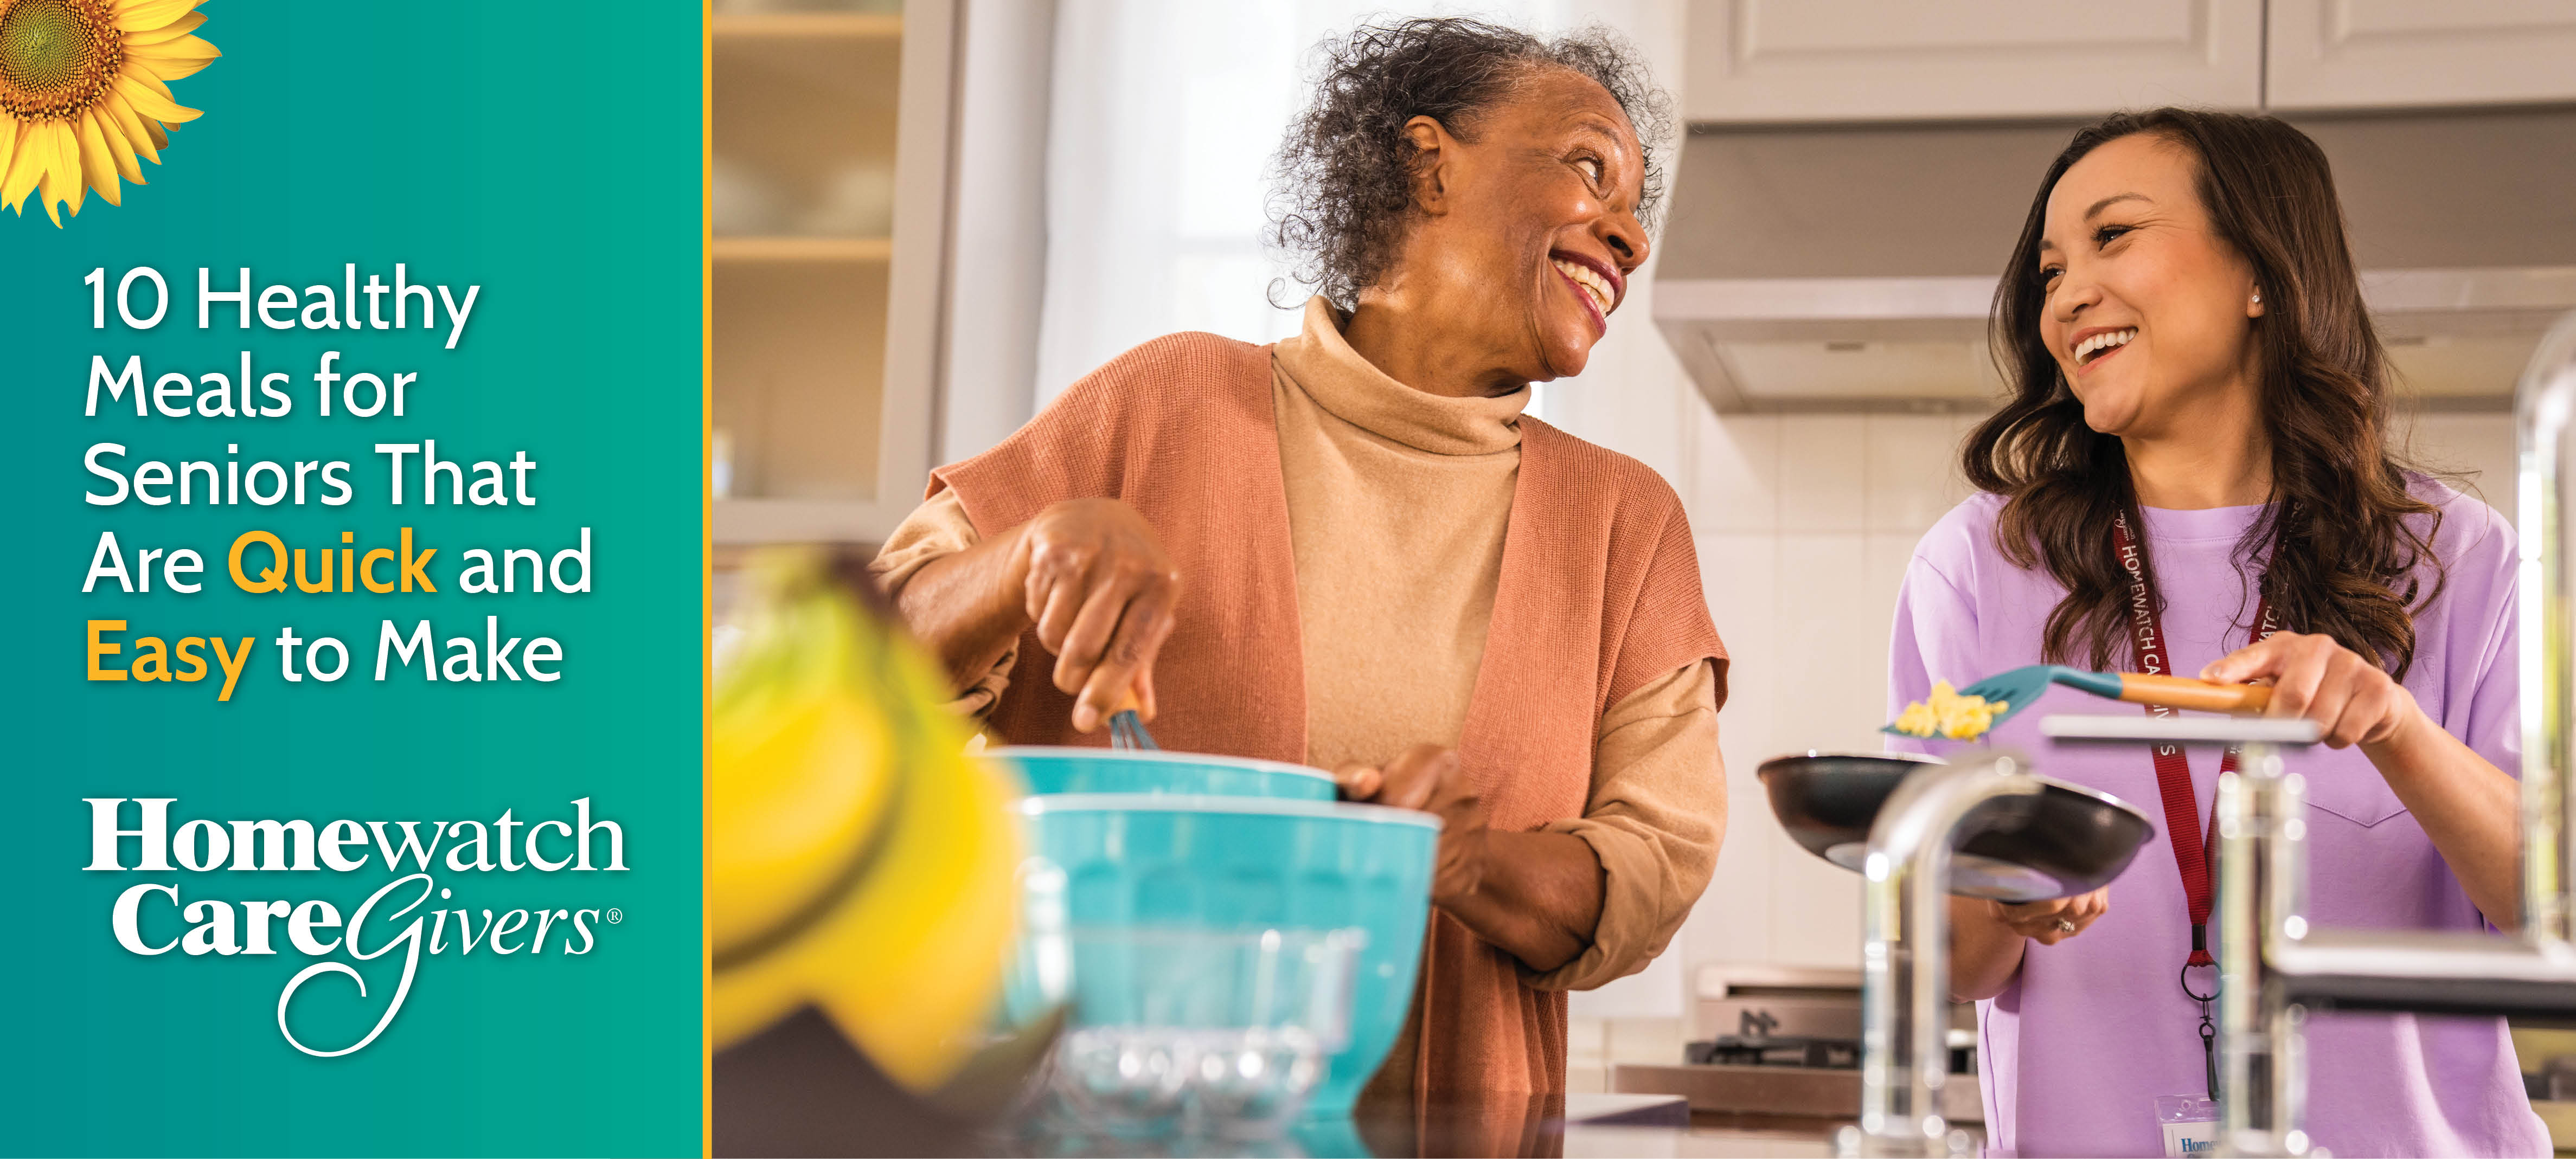 Kitchen Safety Tips For Your Elderly Loved One